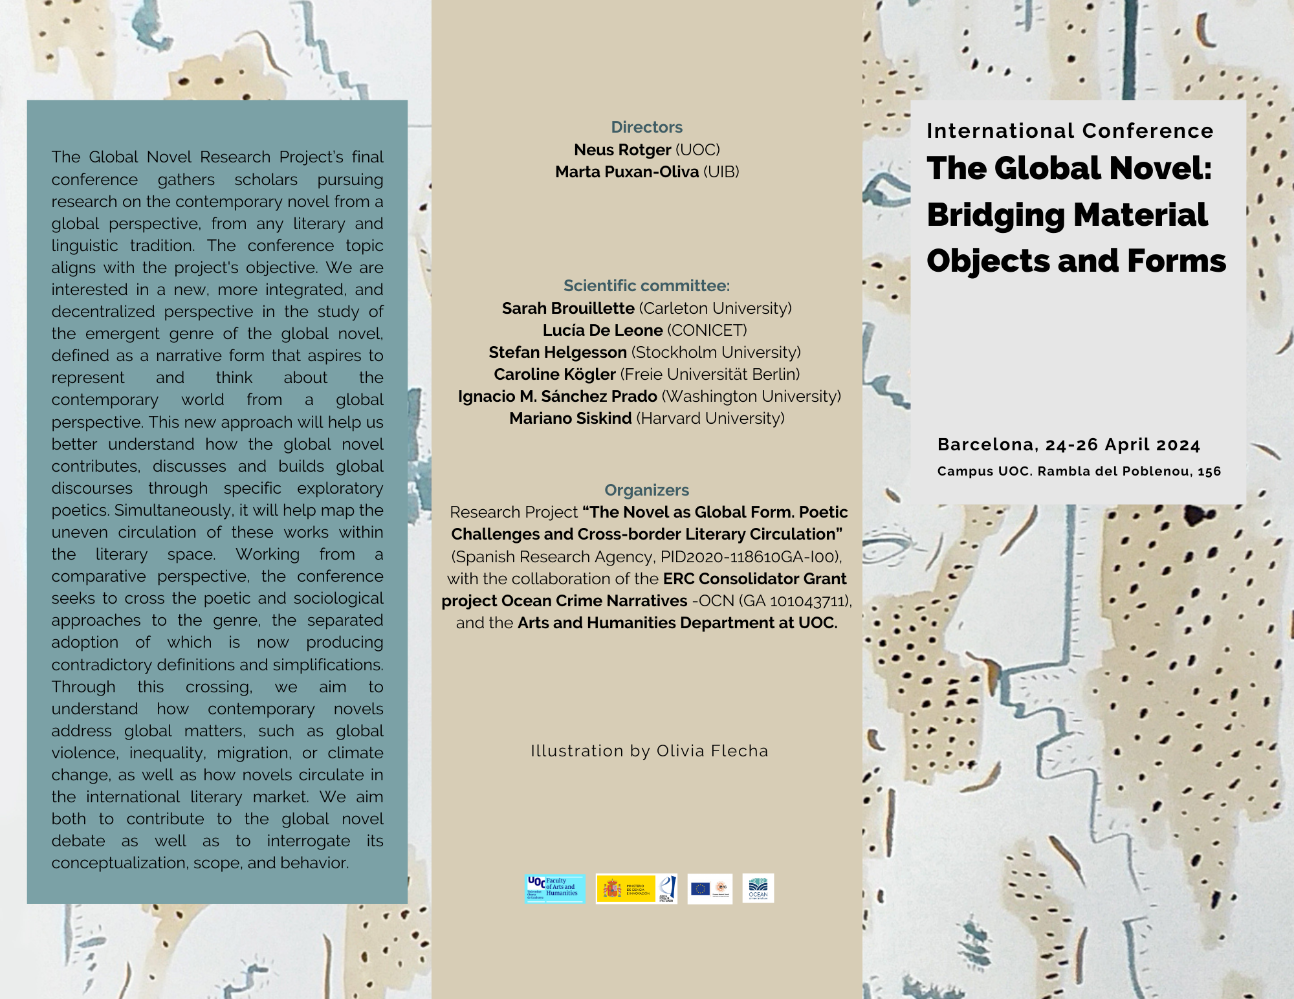 The Global Novel. Bridging Material Objects and Forms (Barcelona, Catalunya)